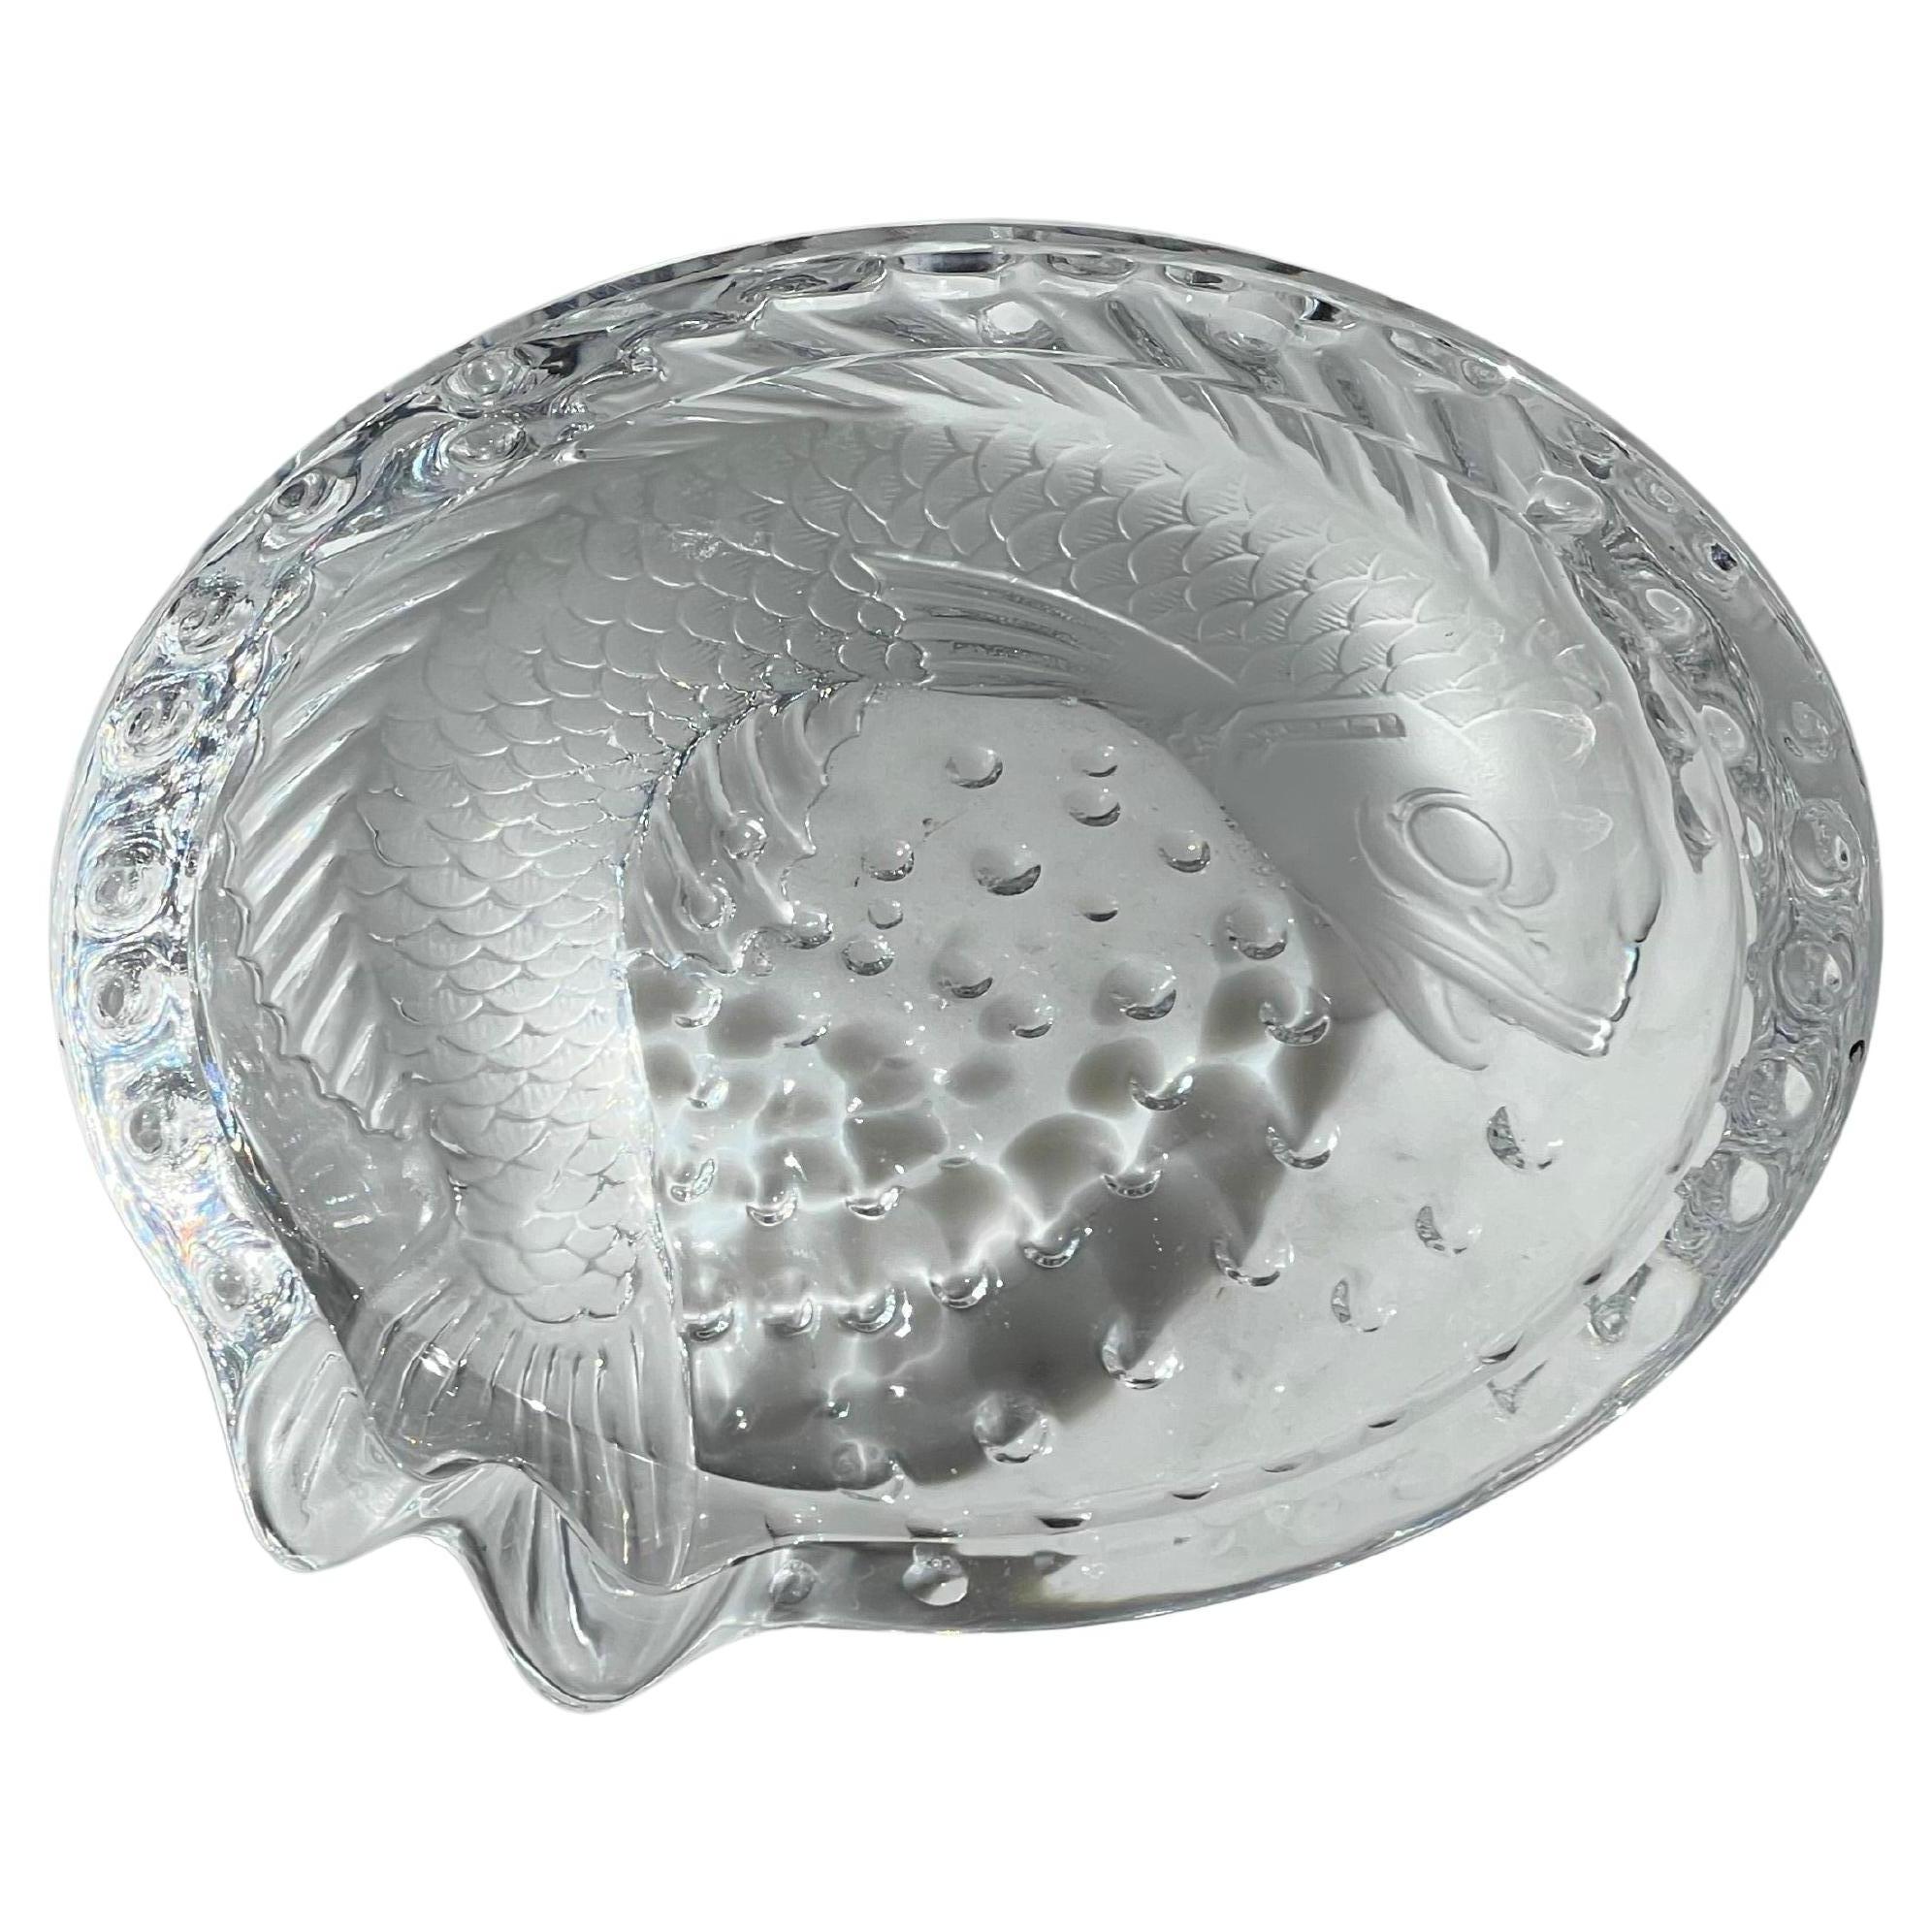 Lalique Crystal “Fish” Ashtray For Sale